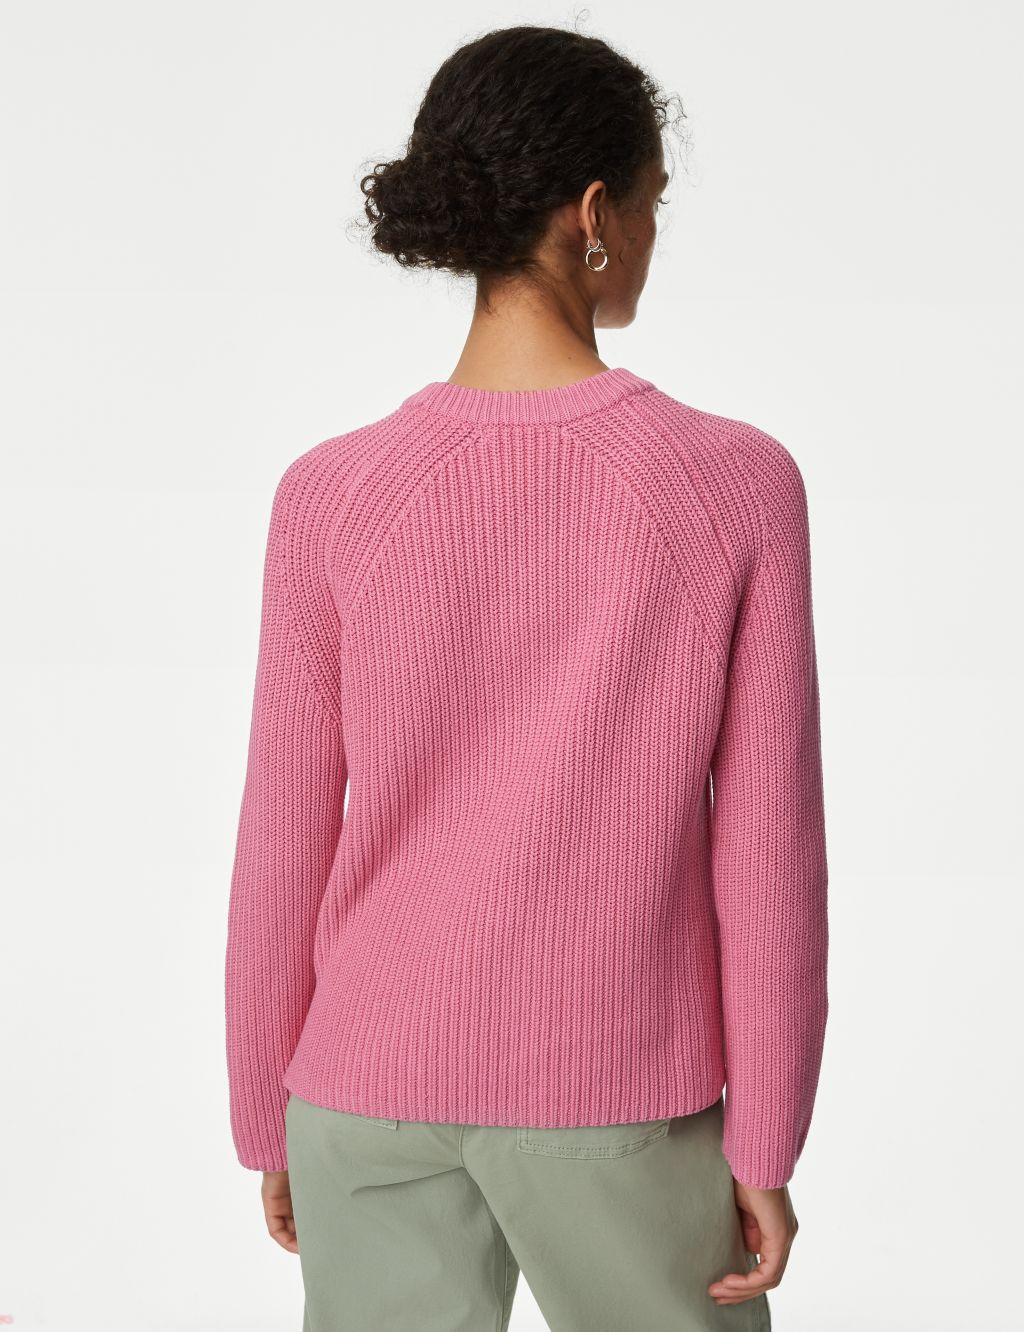 Cotton Rich Ribbed Crew Neck Jumper image 5